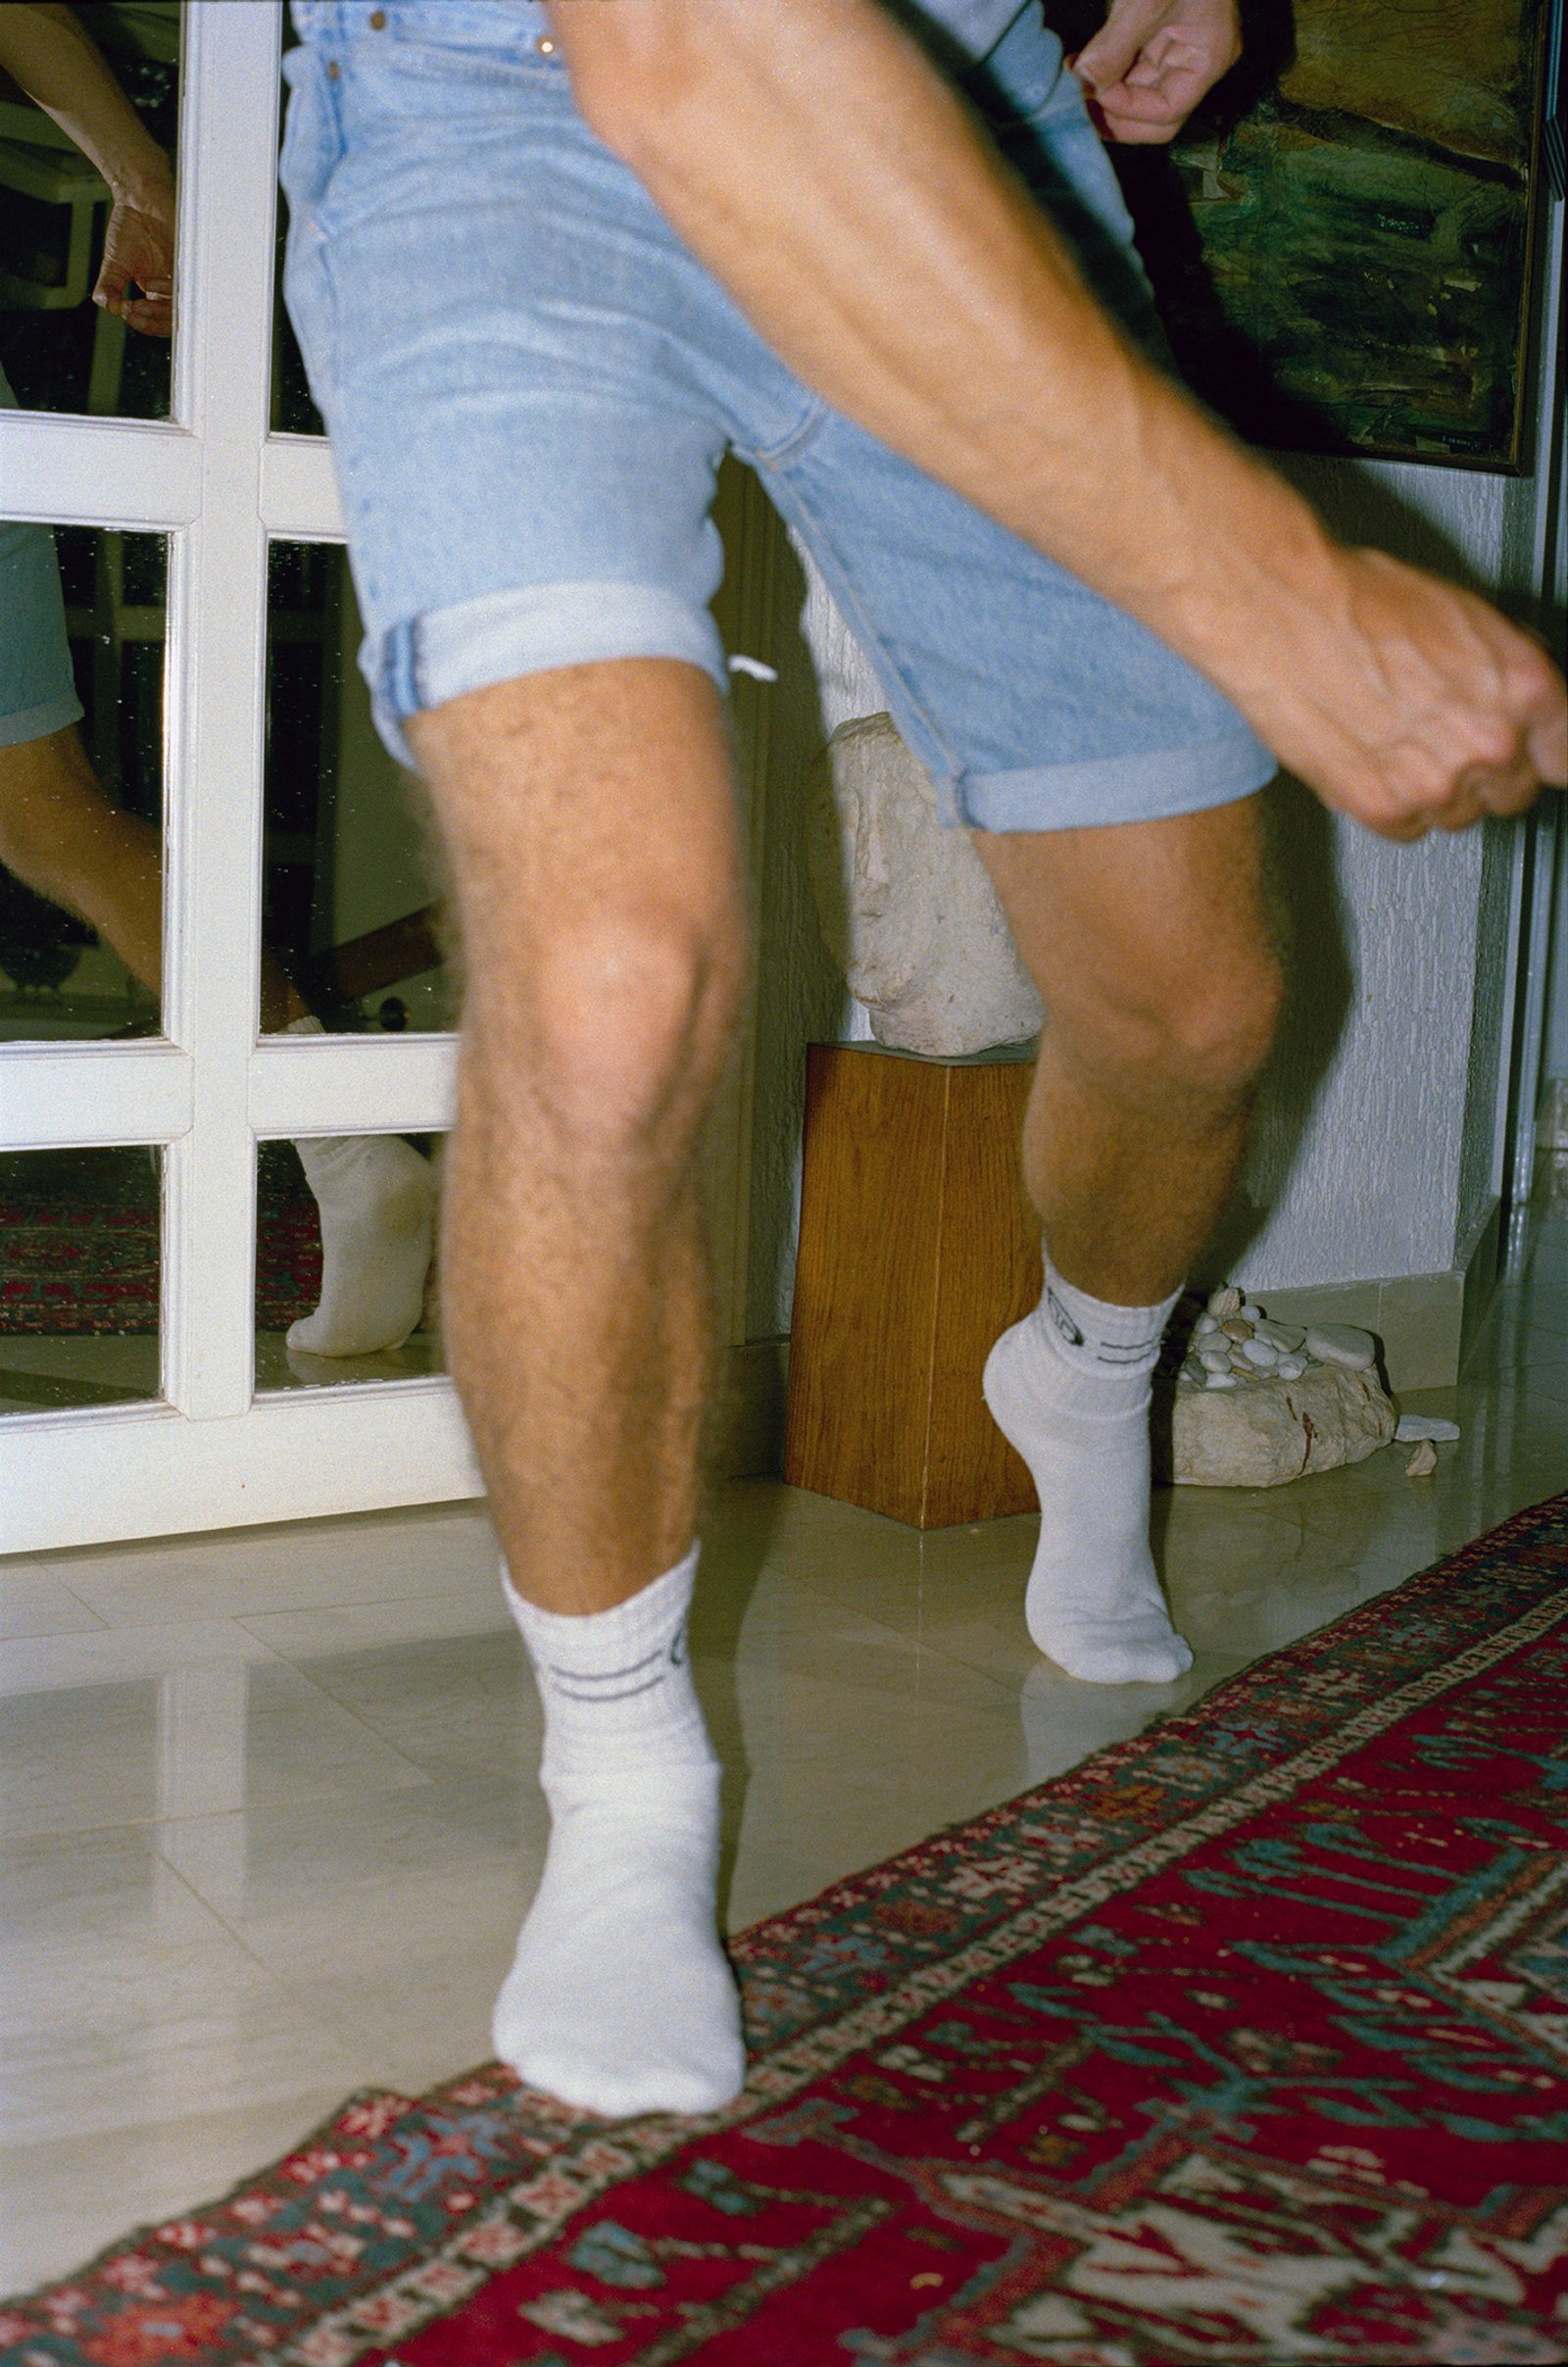 © Sara Perovic - Image from the My Father's Legs photography project